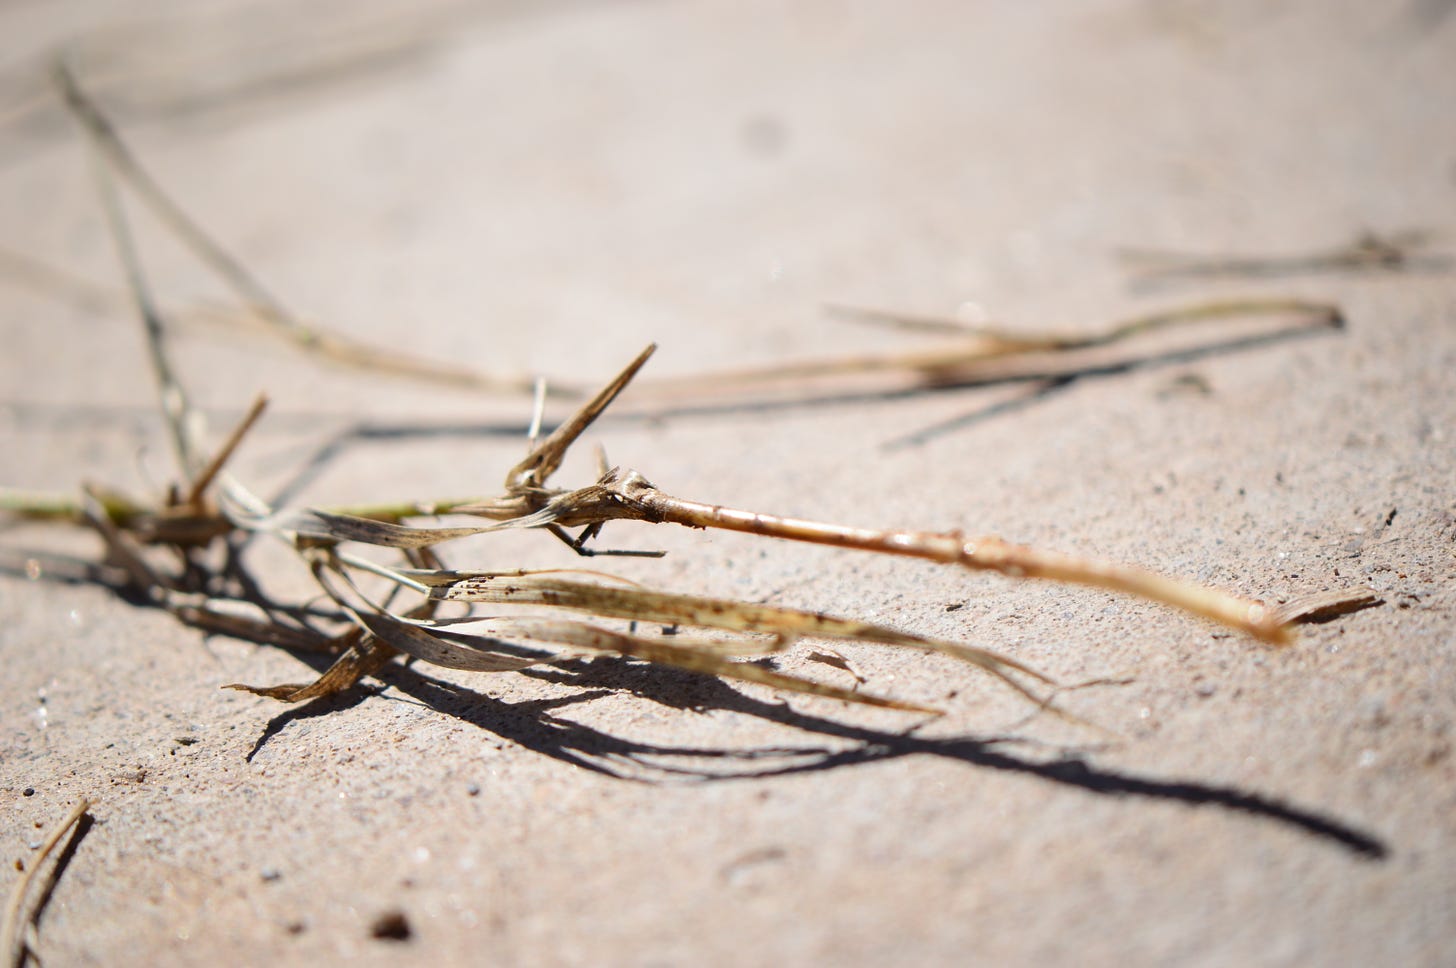 close-up of root section and lower stem of Bermuda grass